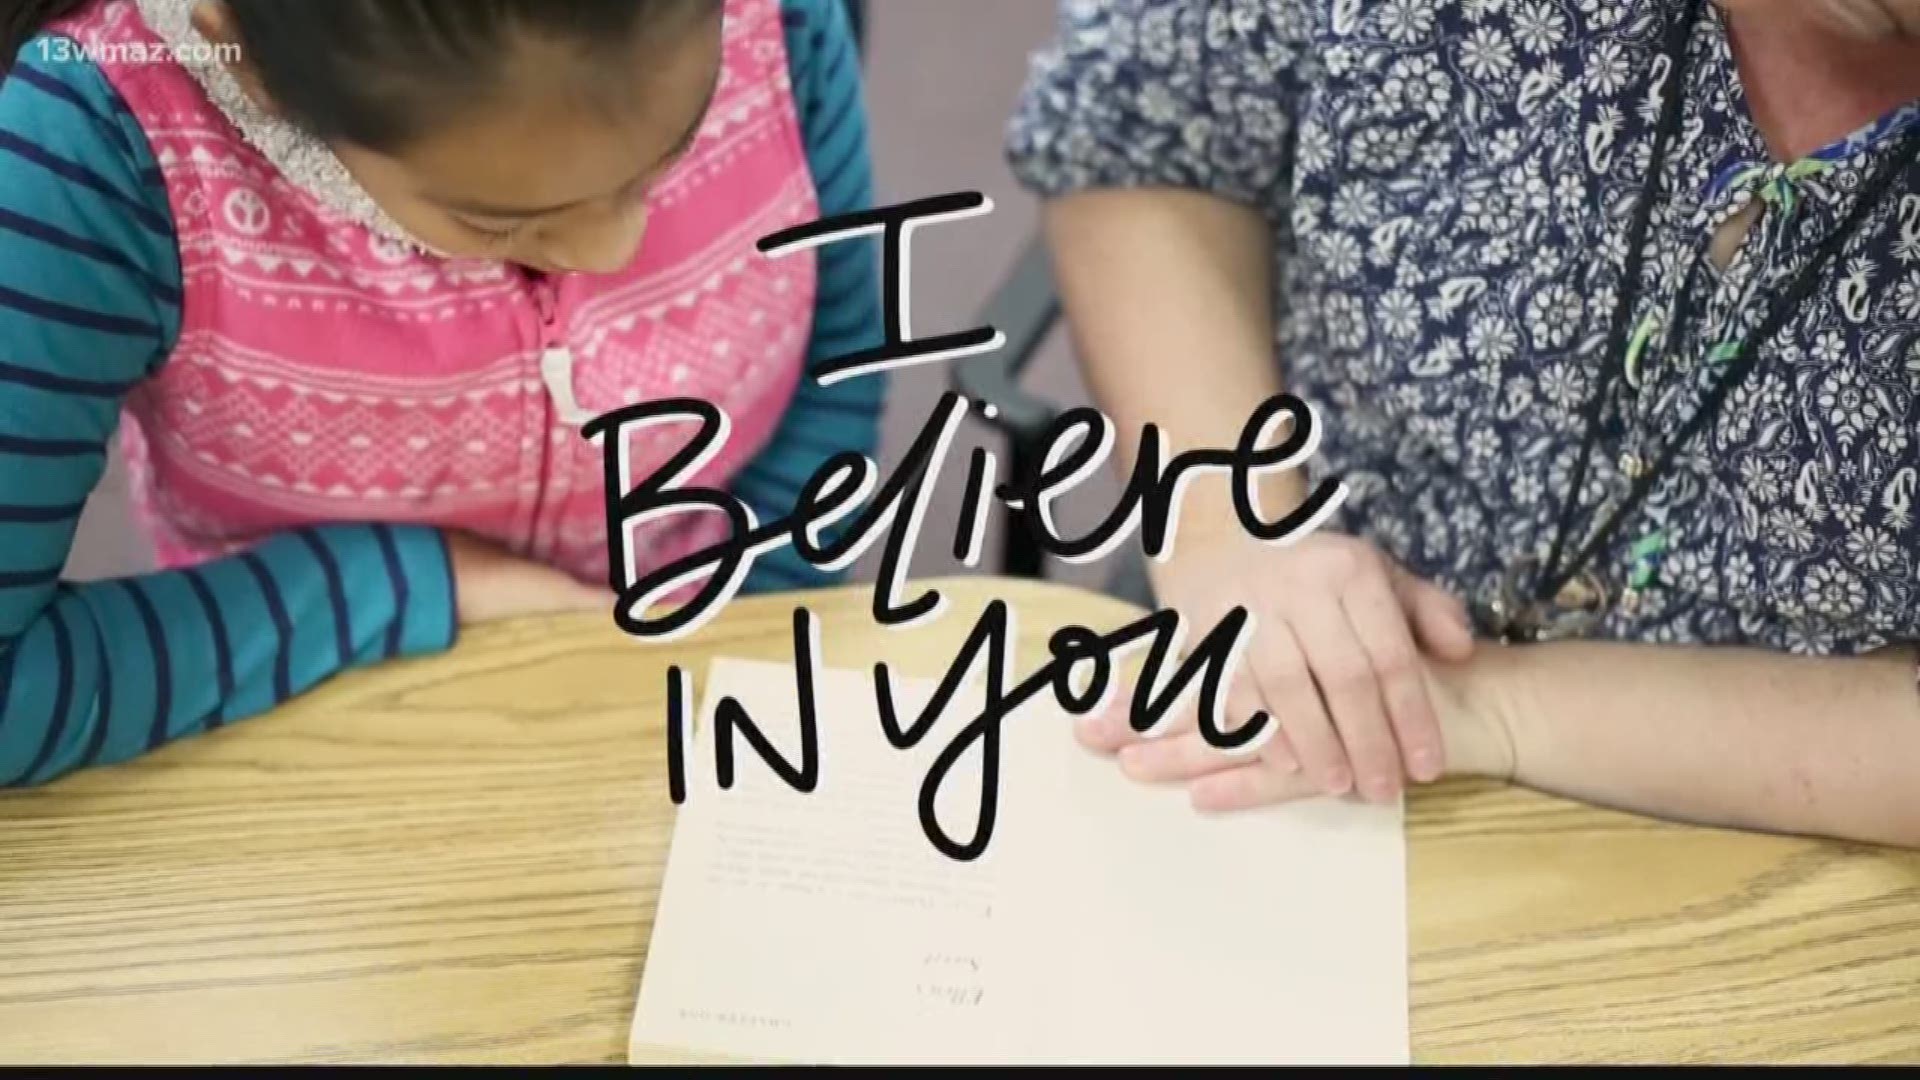 It's a teacher's job to help students grow in their education, and also mature as individuals. It's not every day that teachers tell students how they affect their lives. Ensley Nichols shows us the reaction from a student after a Houston County teacher shares how the young girl inspires her.